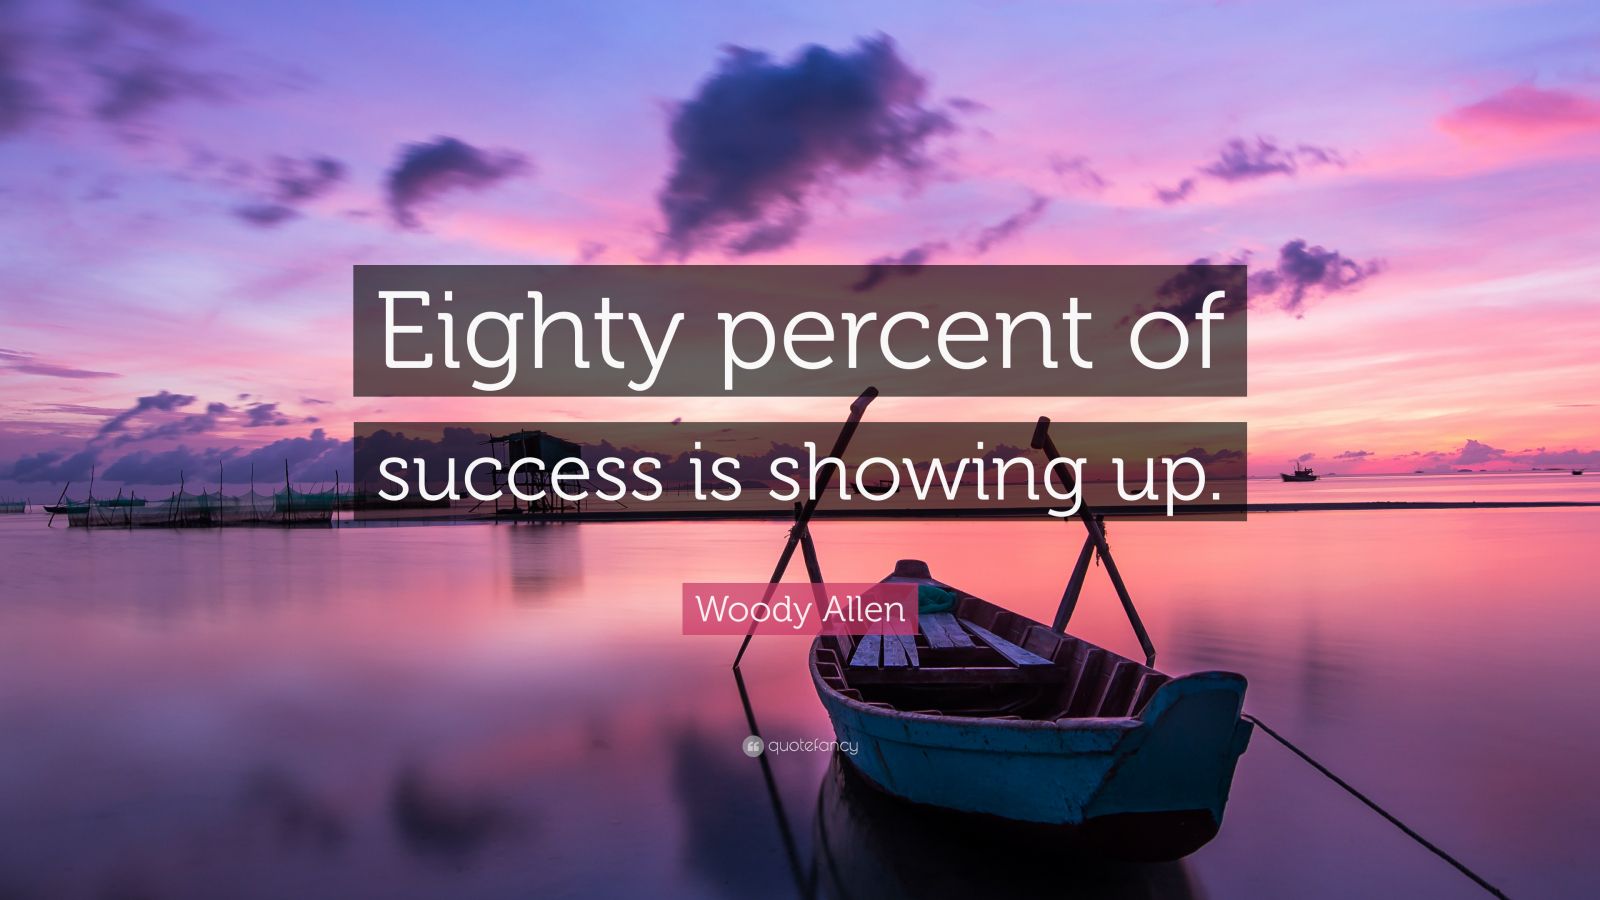 Woody Allen Quote “eighty Percent Of Success Is Showing Up” 23 Wallpapers Quotefancy 5080